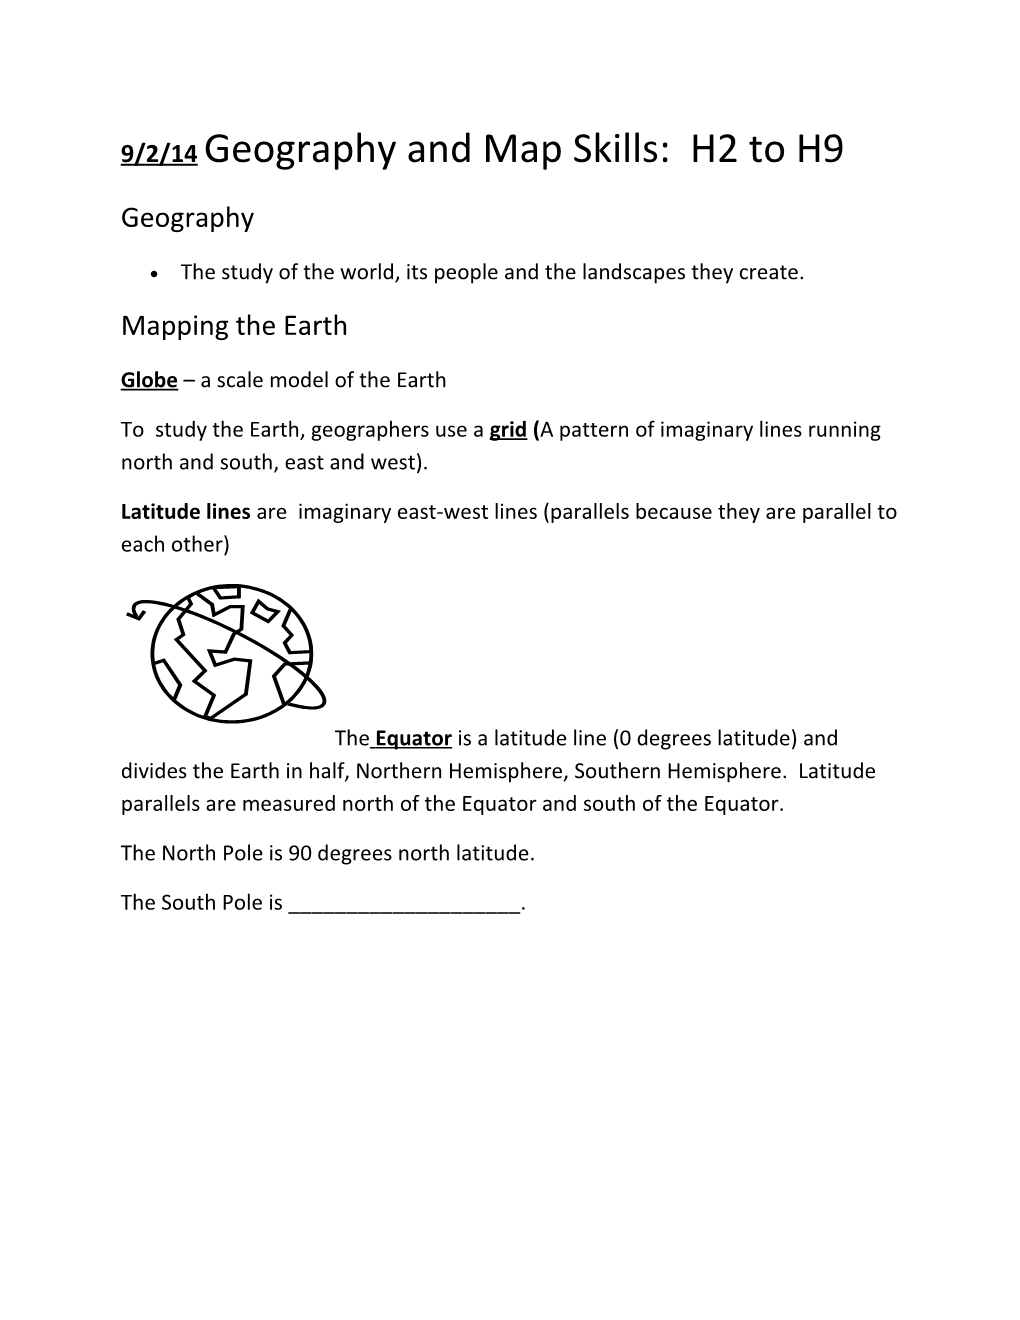 9/2/14Geography and Map Skills: H2 to H9